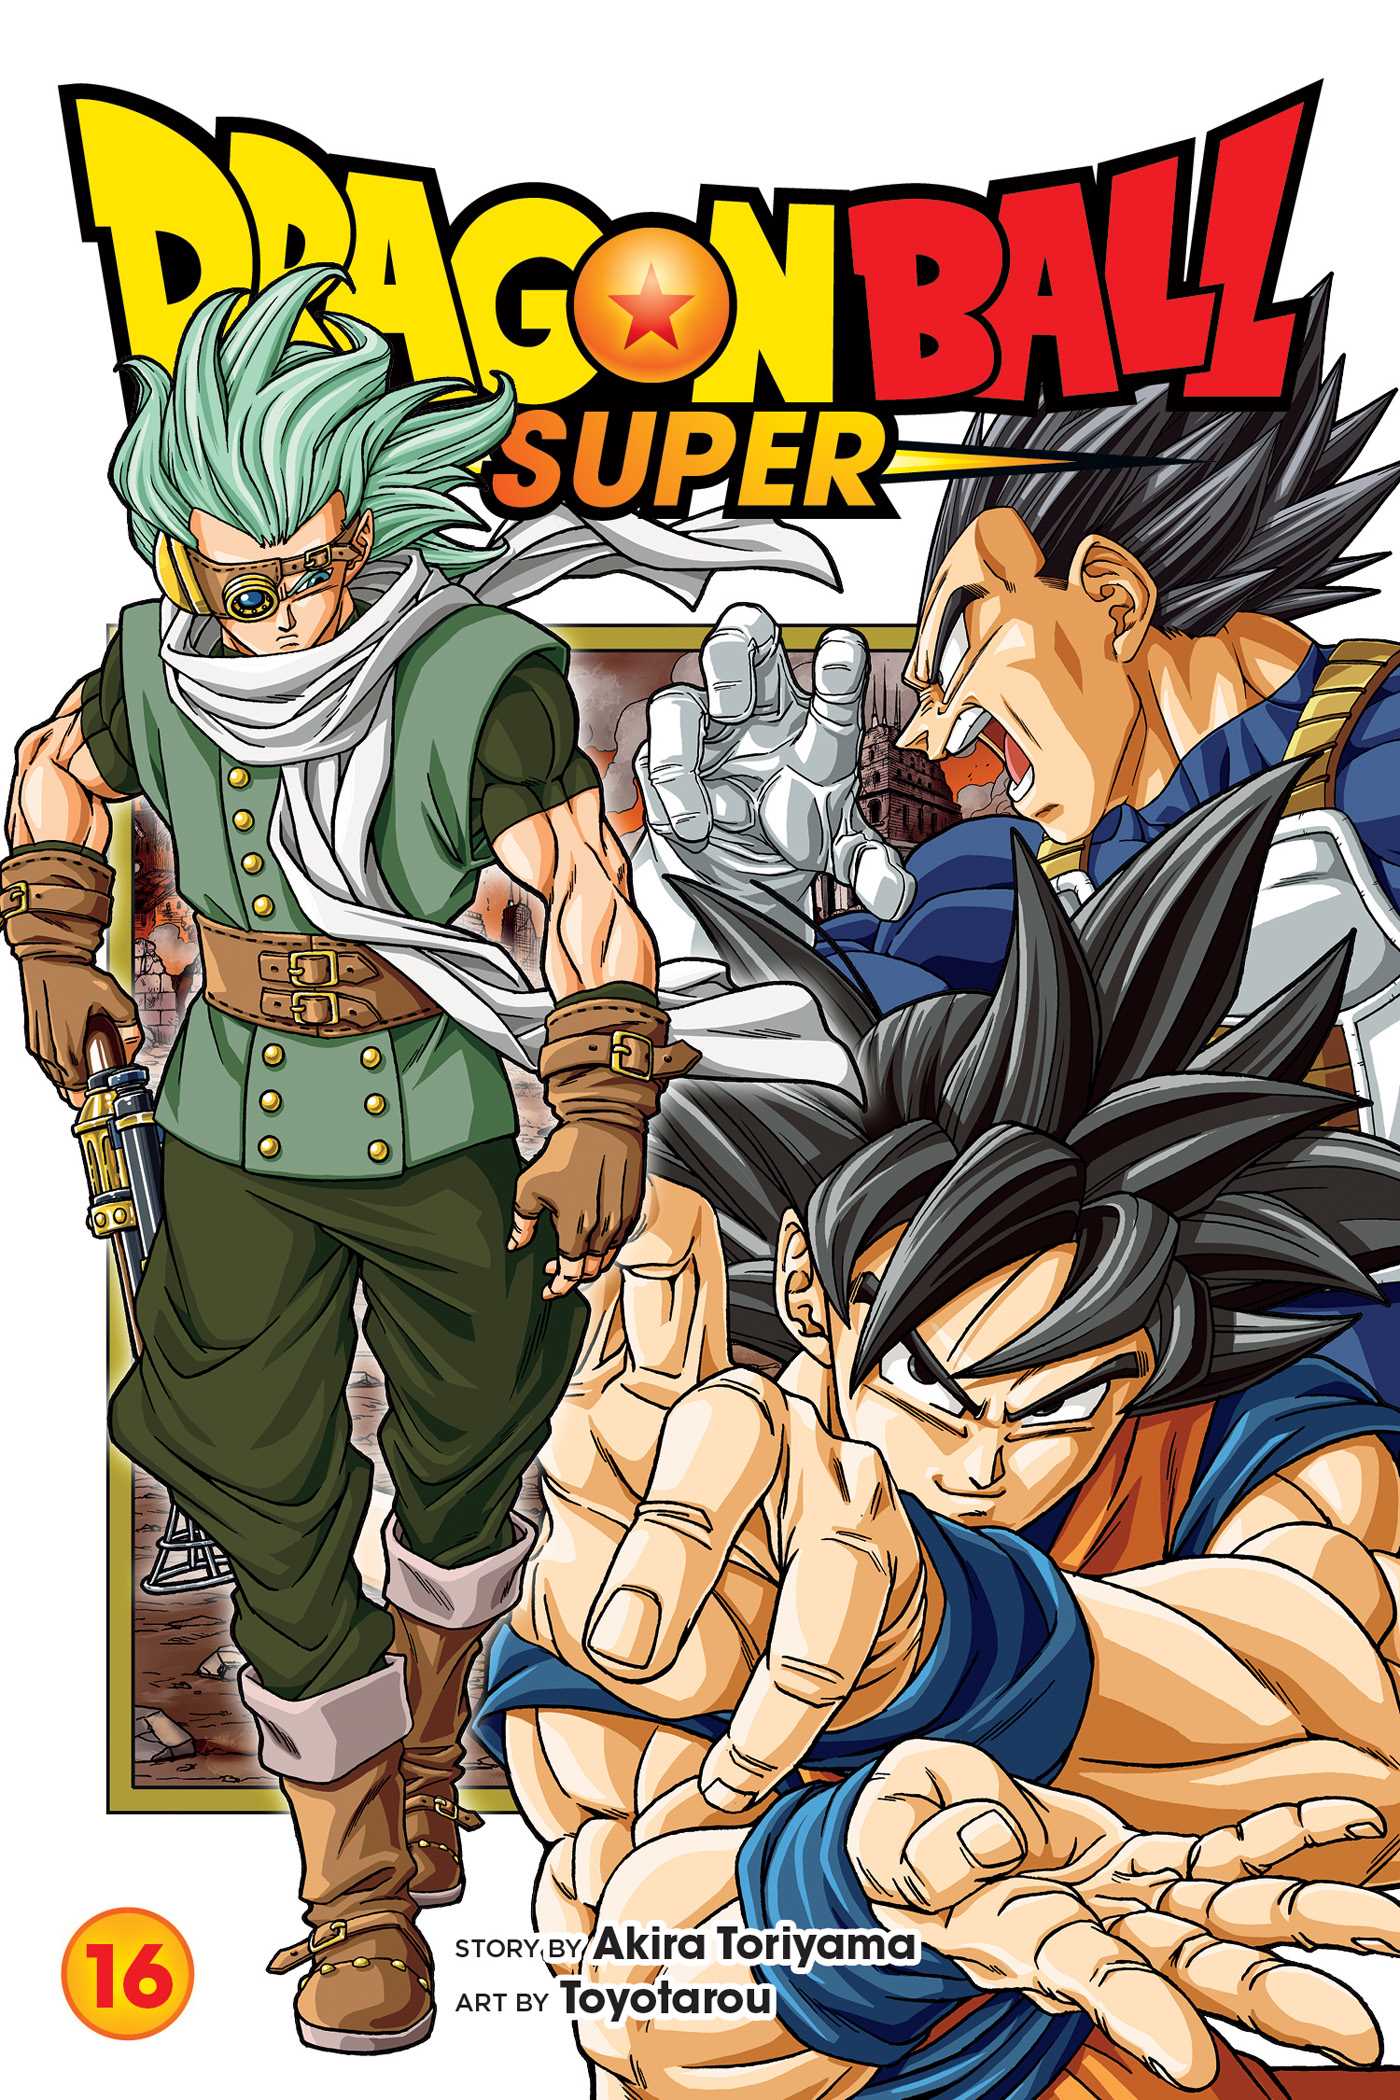 What To Expect For The Upcoming Dragon Ball Super Arc